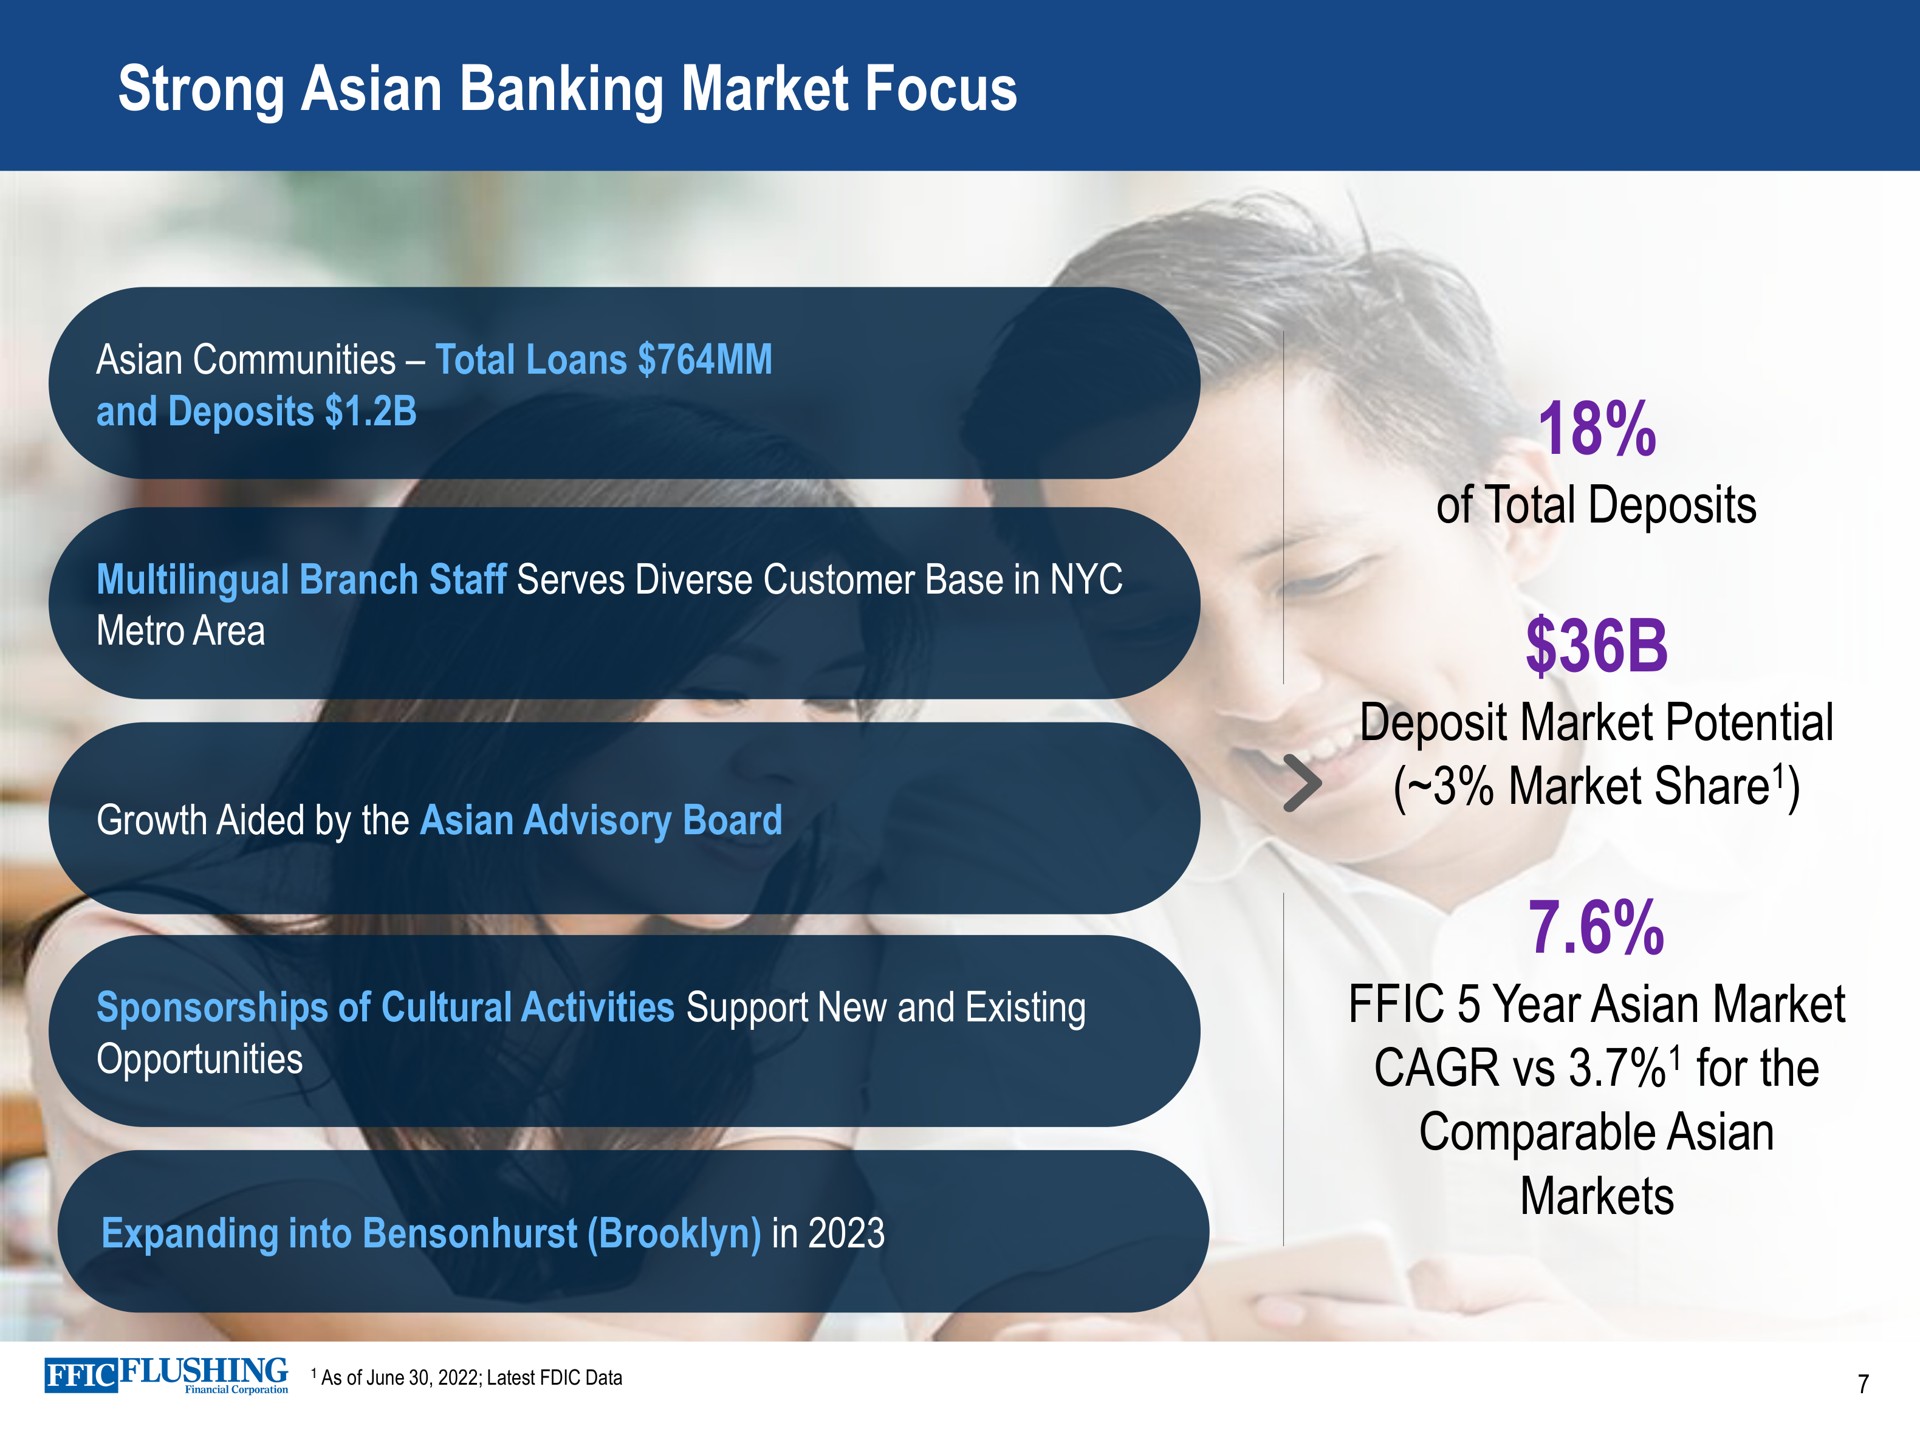 strong banking market focus sponsorships of cultural activities support new and existing opportunities of total deposits deposit potential share year for the comparable markets | Flushing Financial